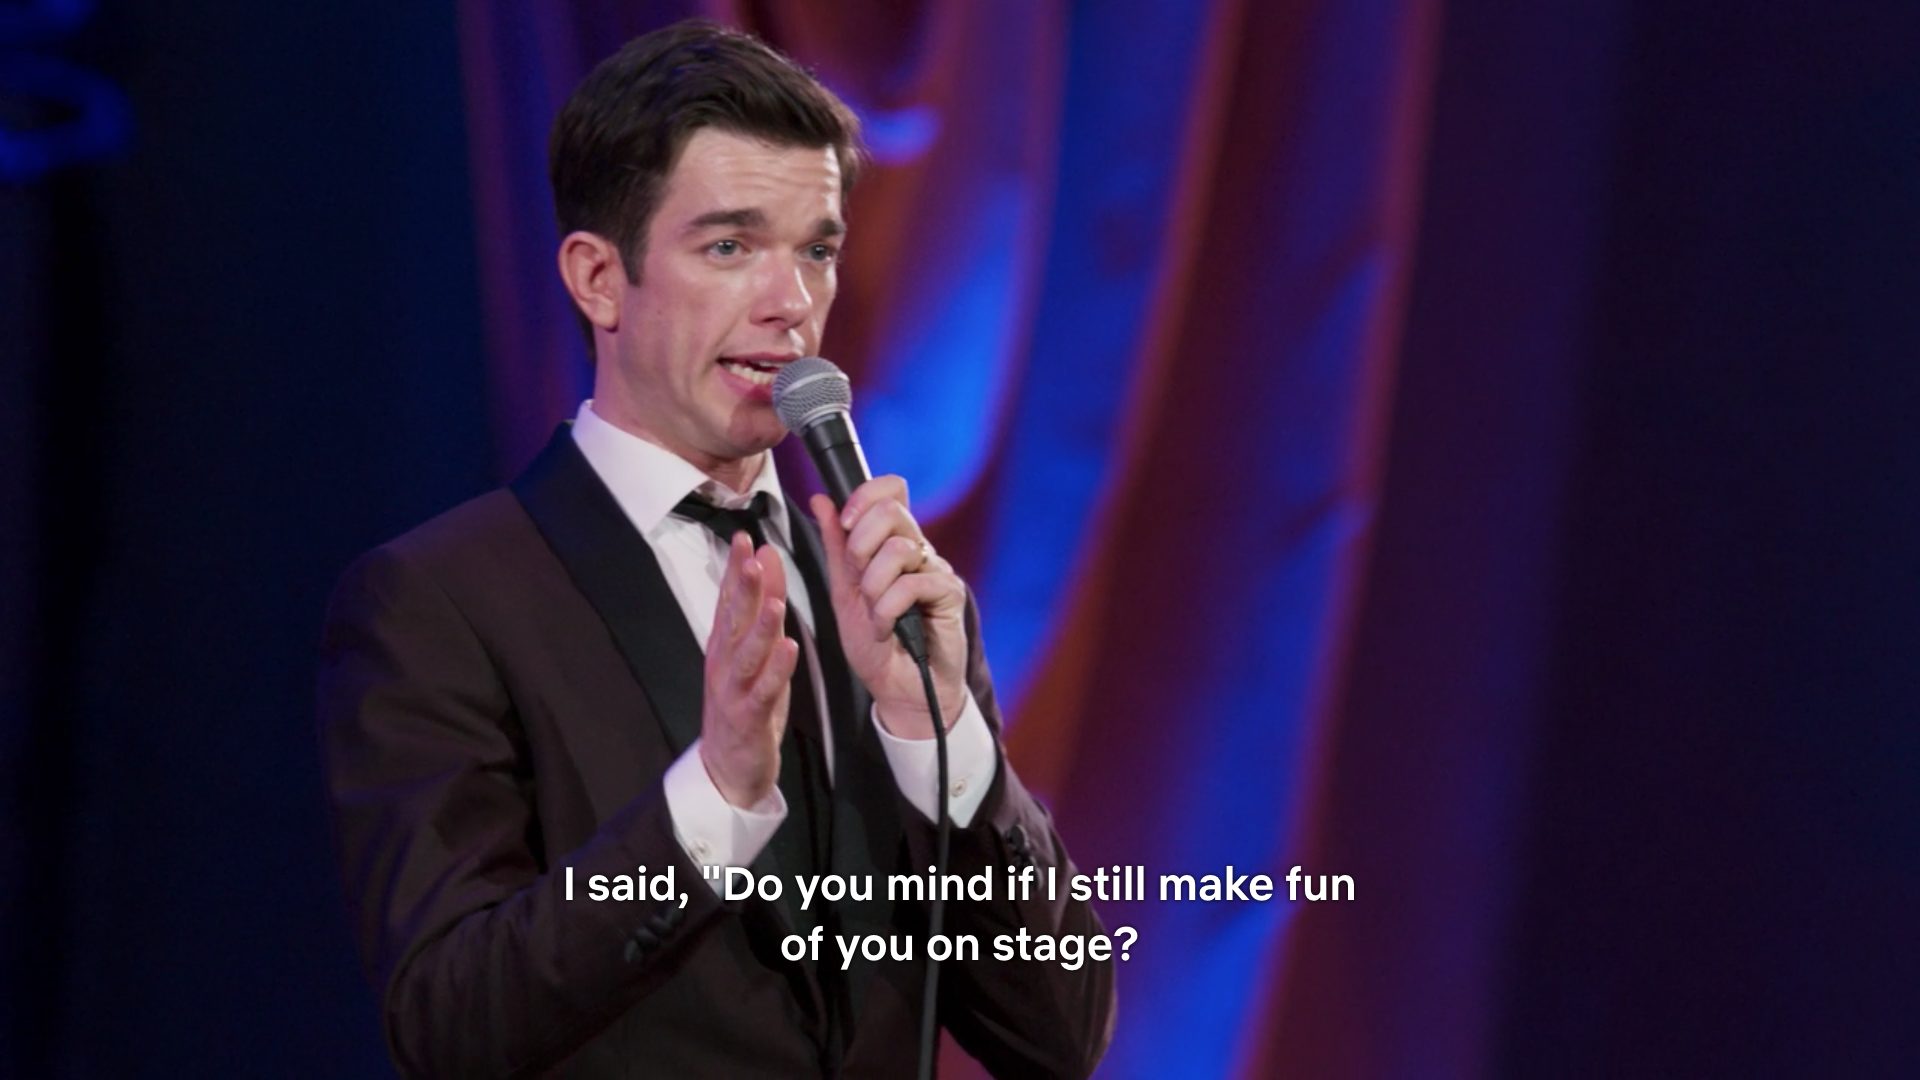 The Best Part of John Mulaney's Stand-Up is His Jewish Wife Jokes - Hey Alma